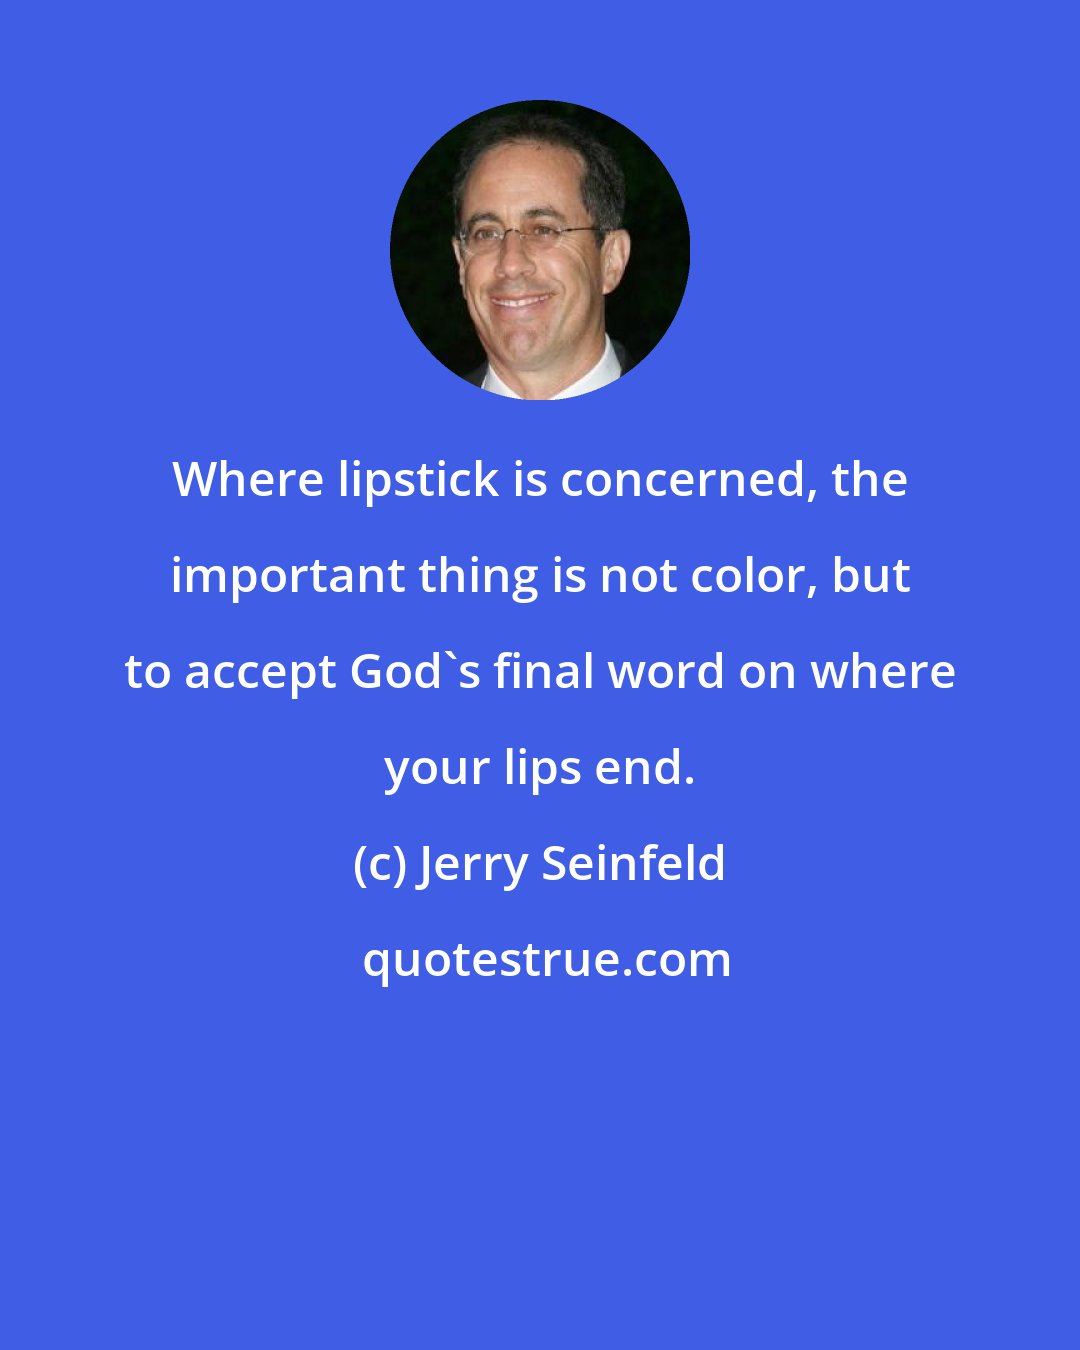 Jerry Seinfeld: Where lipstick is concerned, the important thing is not color, but to accept God's final word on where your lips end.